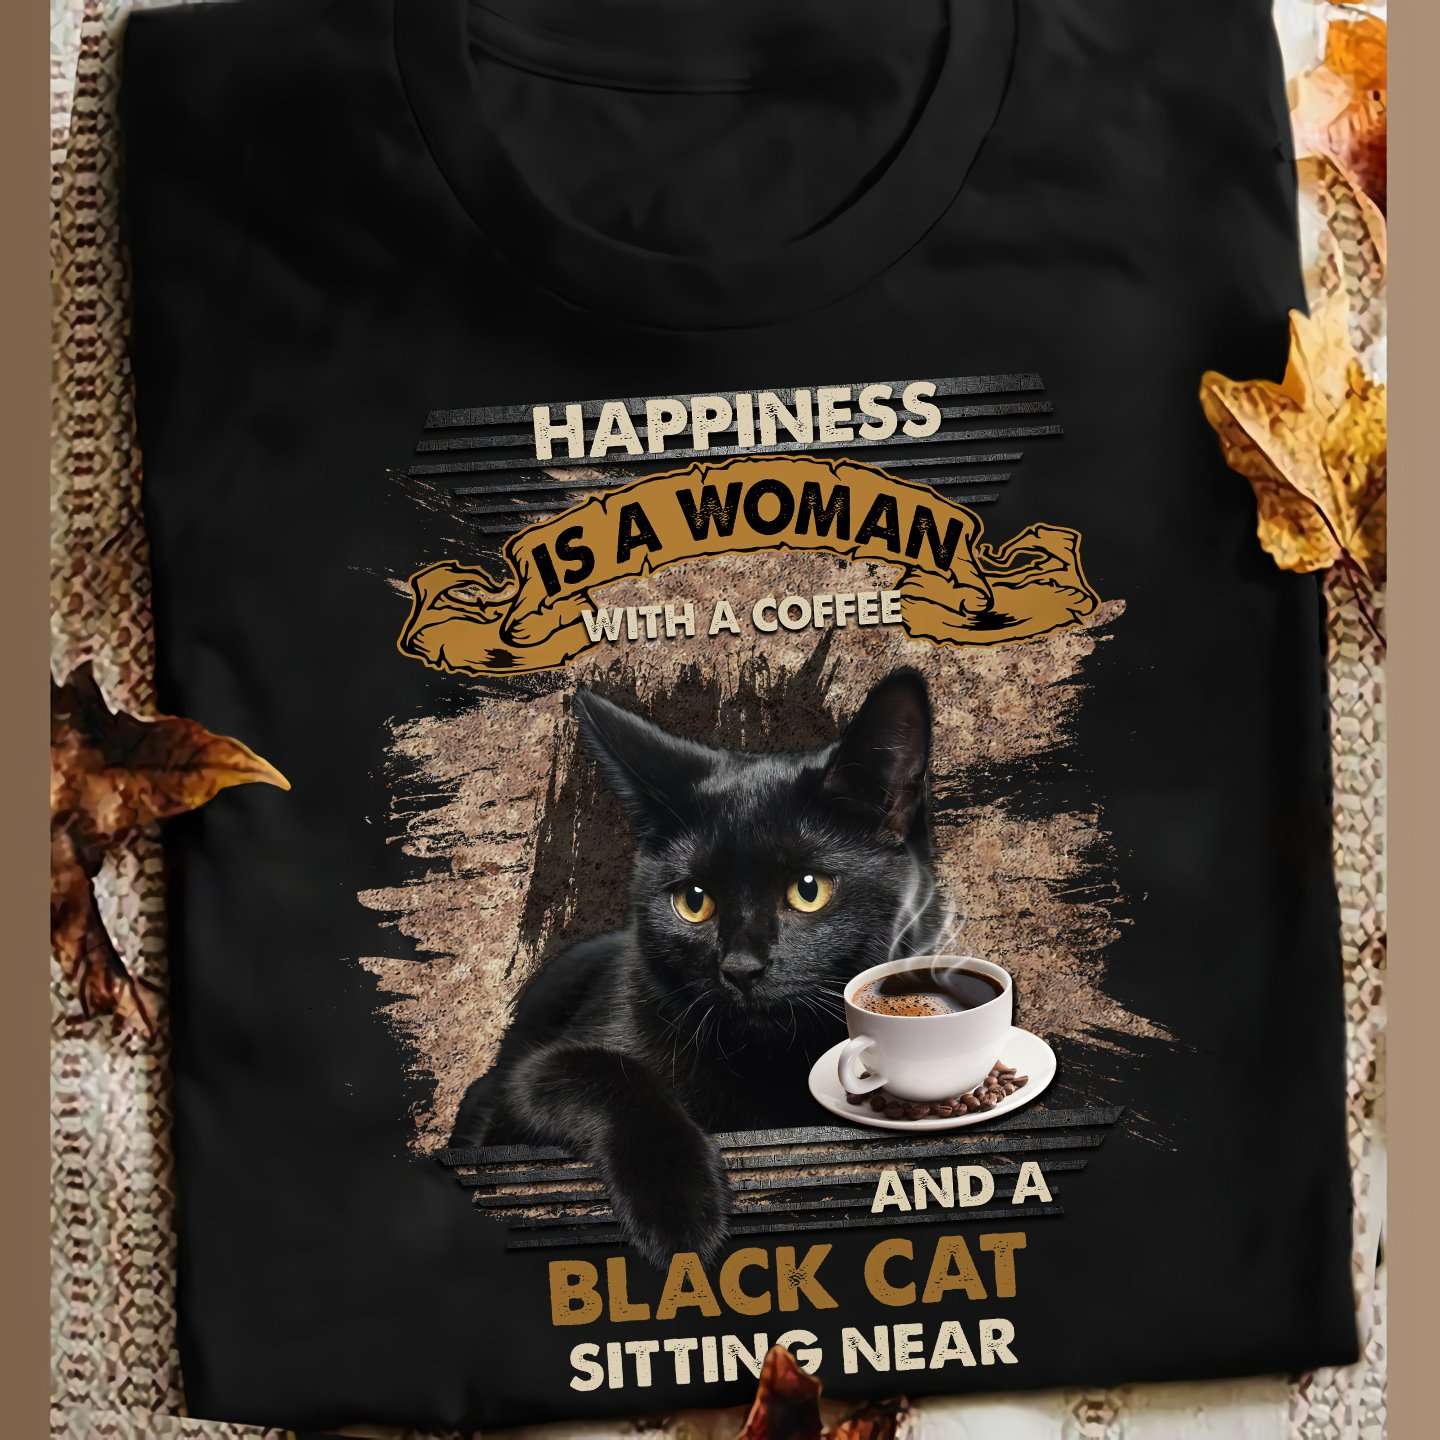 Black Cat Beer - Happiness is a woman with a beer and a black cat sitting near